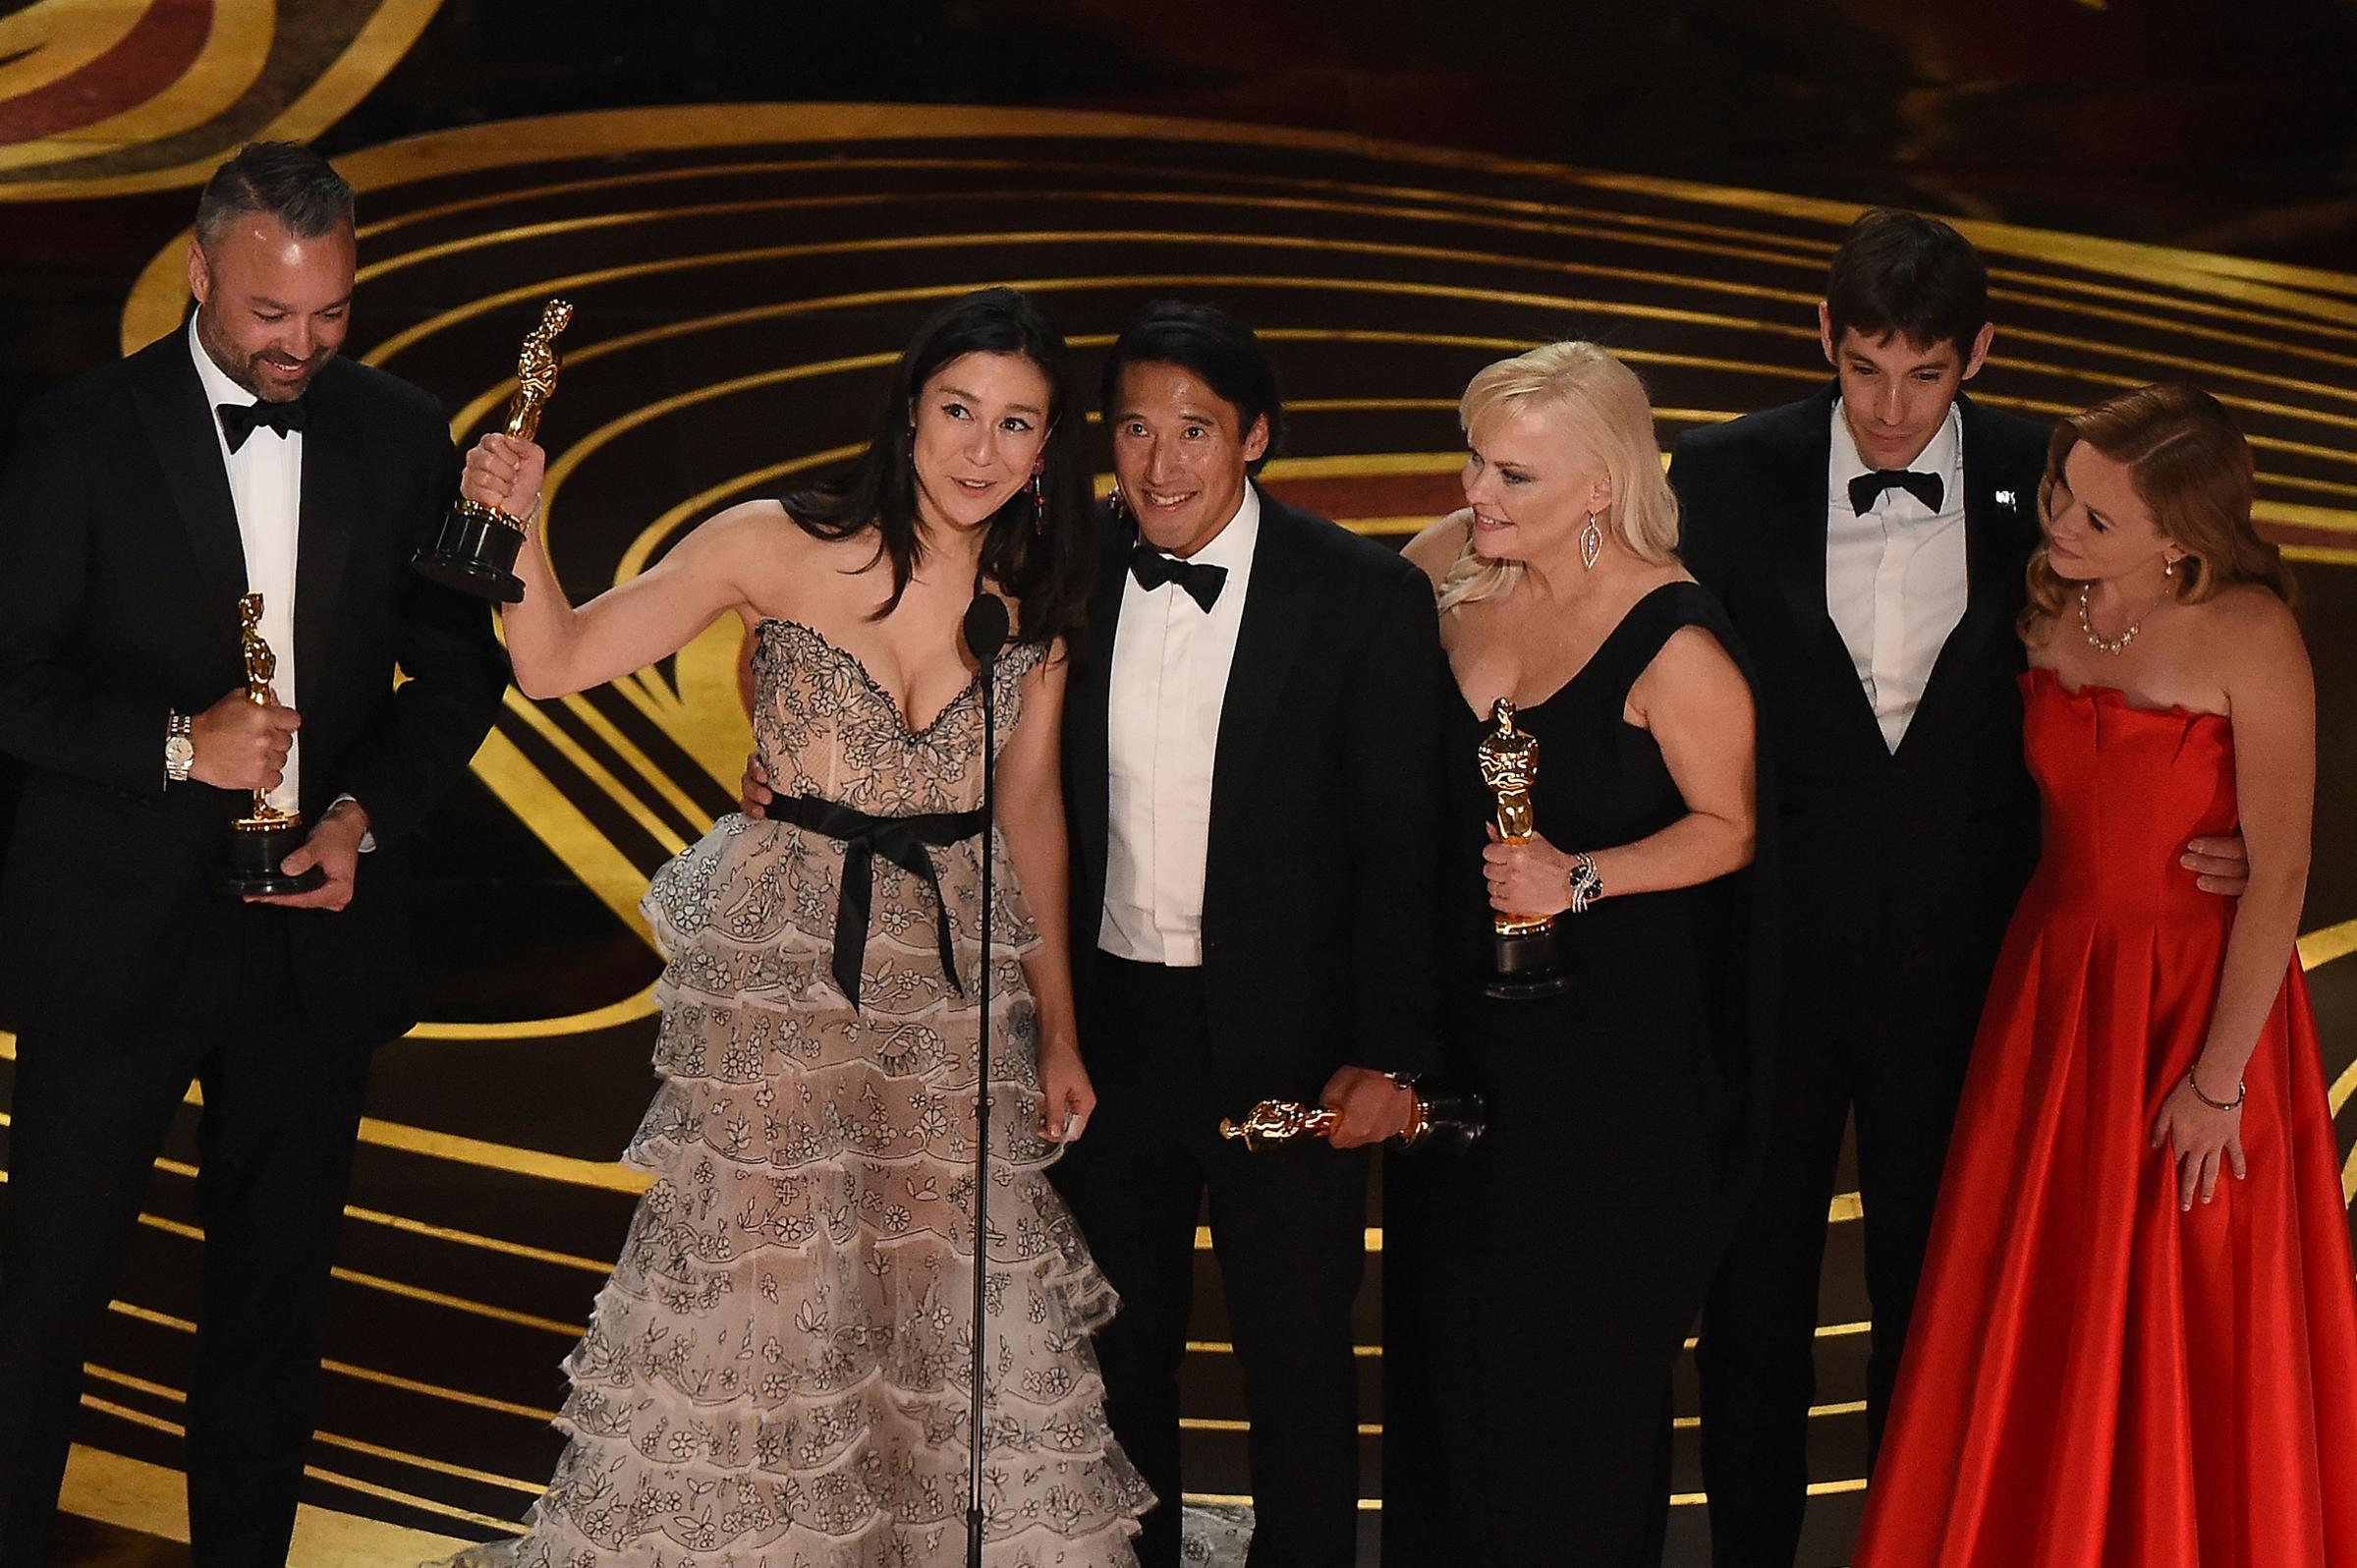 The crew of "Free Solo" accepts the Oscar for Best Documentary during the 91st Annual Academy Awards